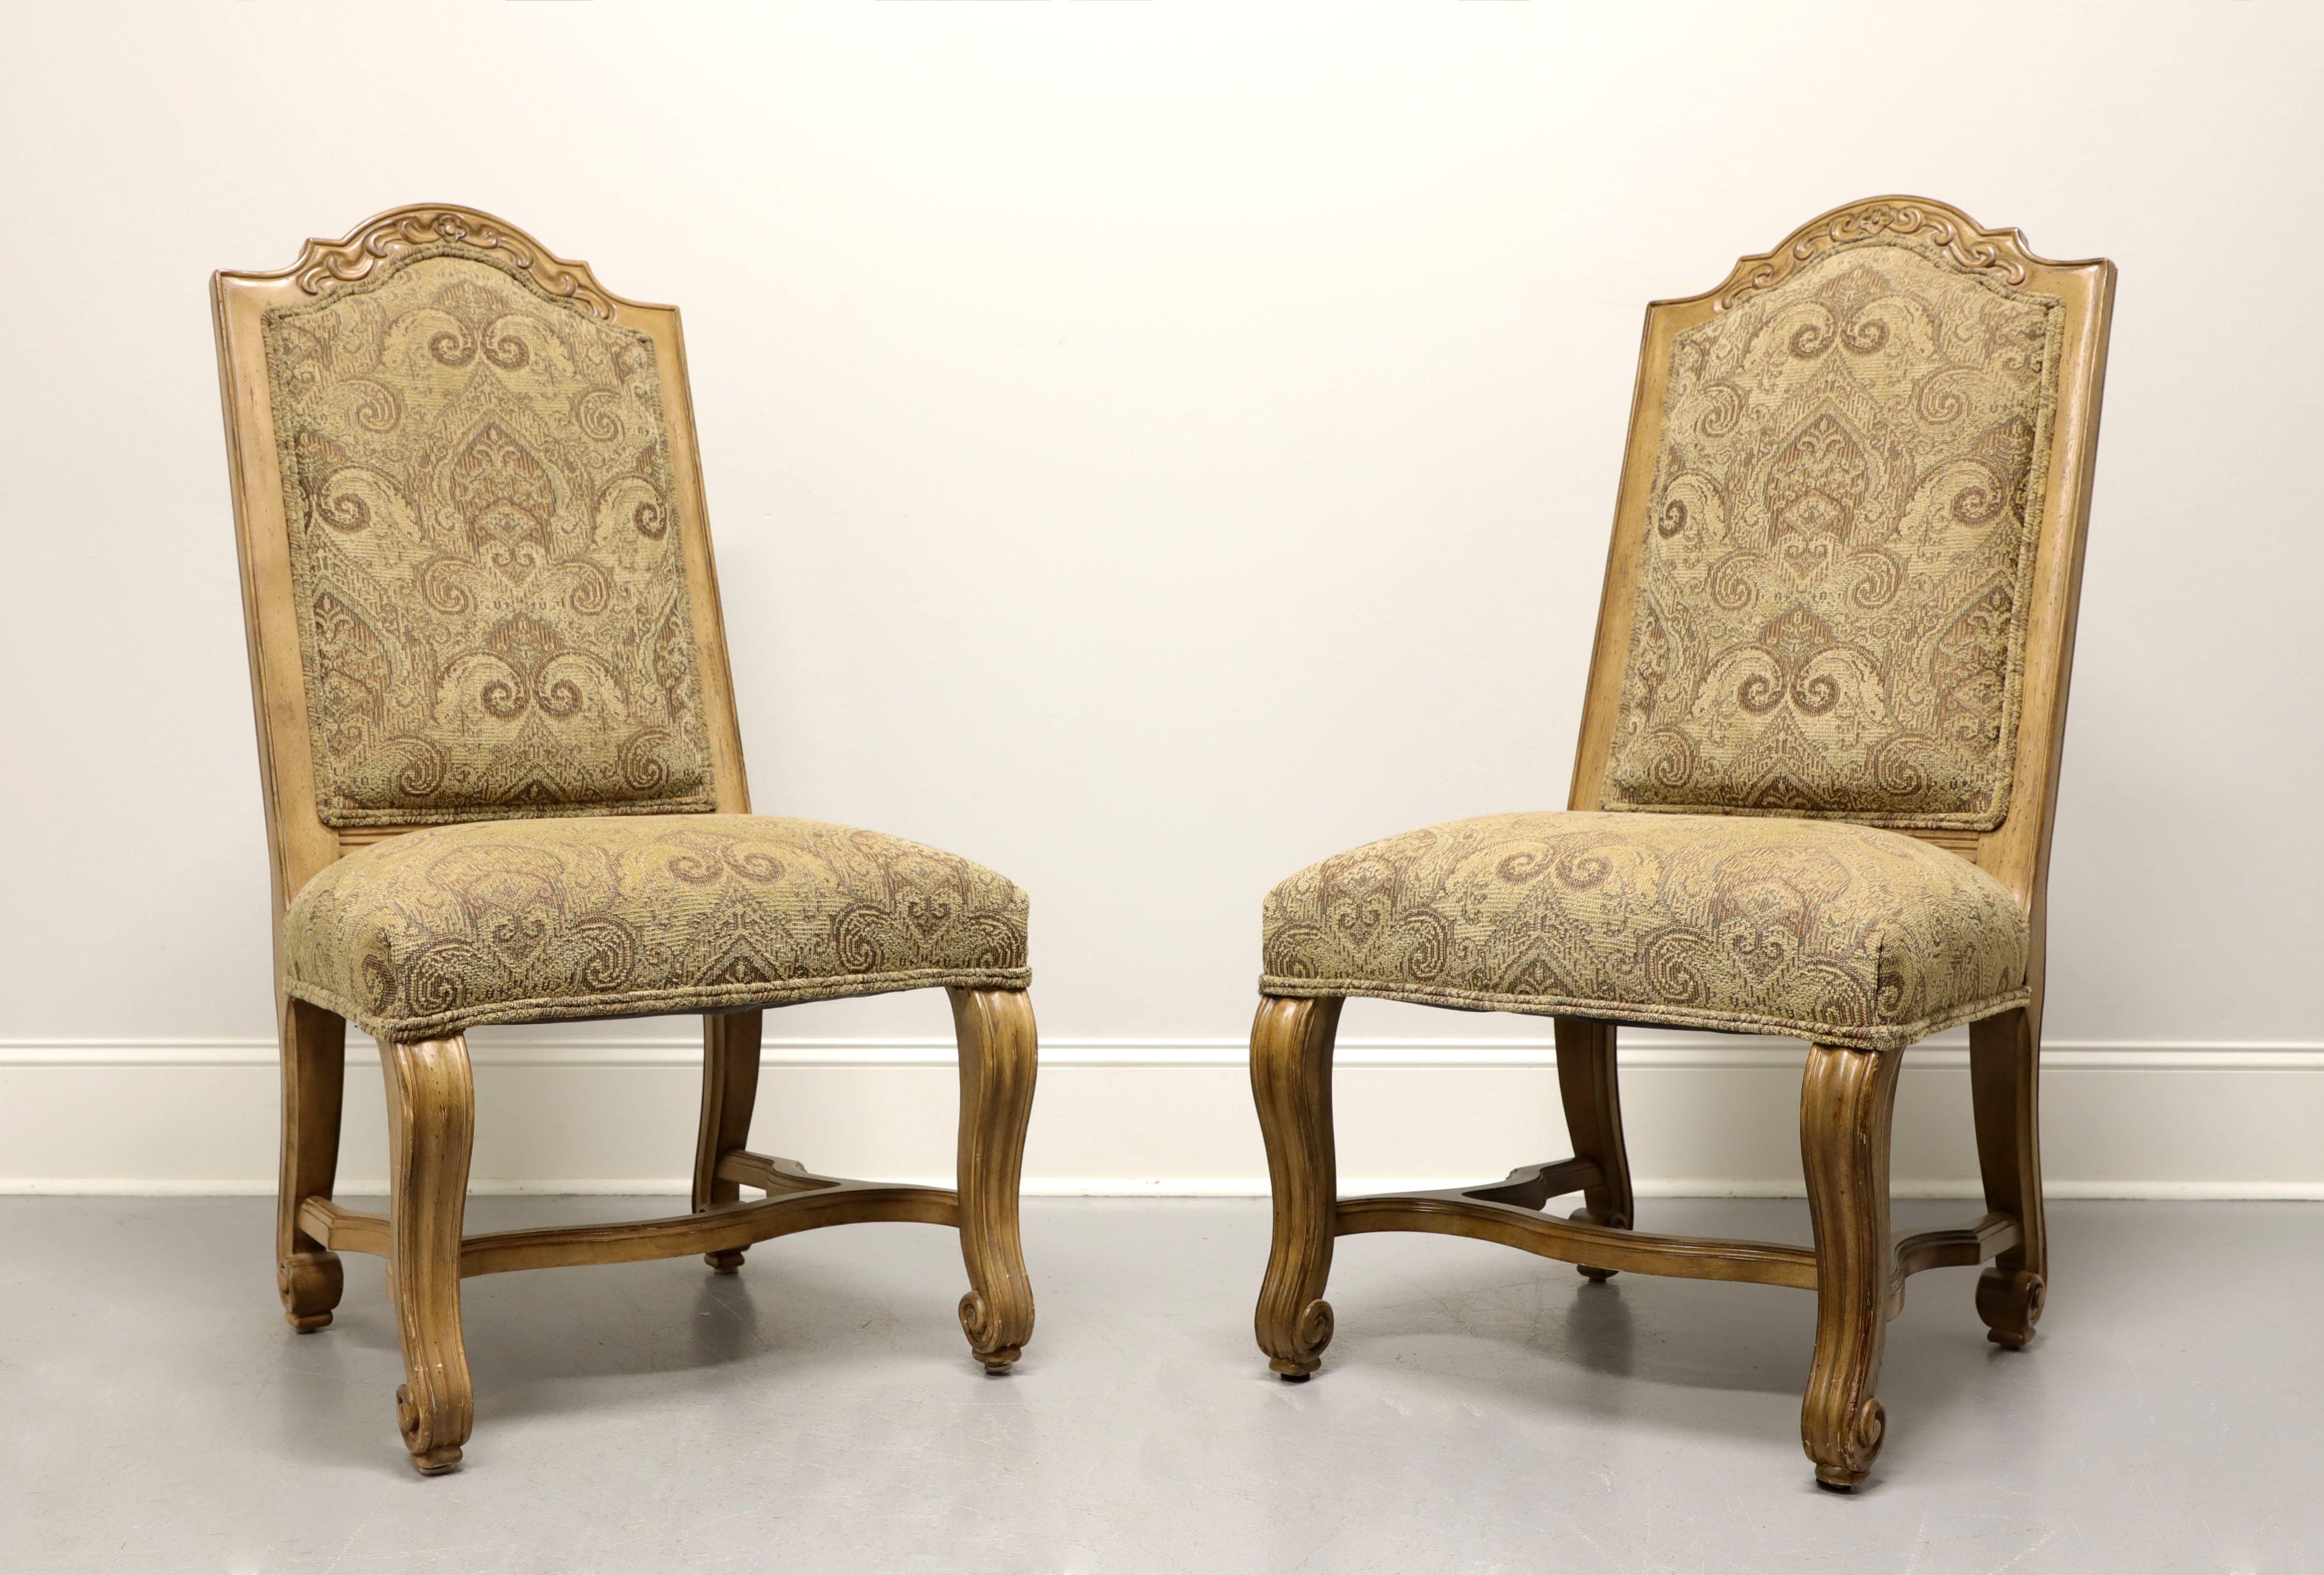 A pair of Rustic Italian style dining side chairs by Bernhardt Furniture. Solid wood frames with a distressed finish. Arched top to seat backs, carved curved legs and stretcher base. The high seat backs are upholstered with a tapestry like raised